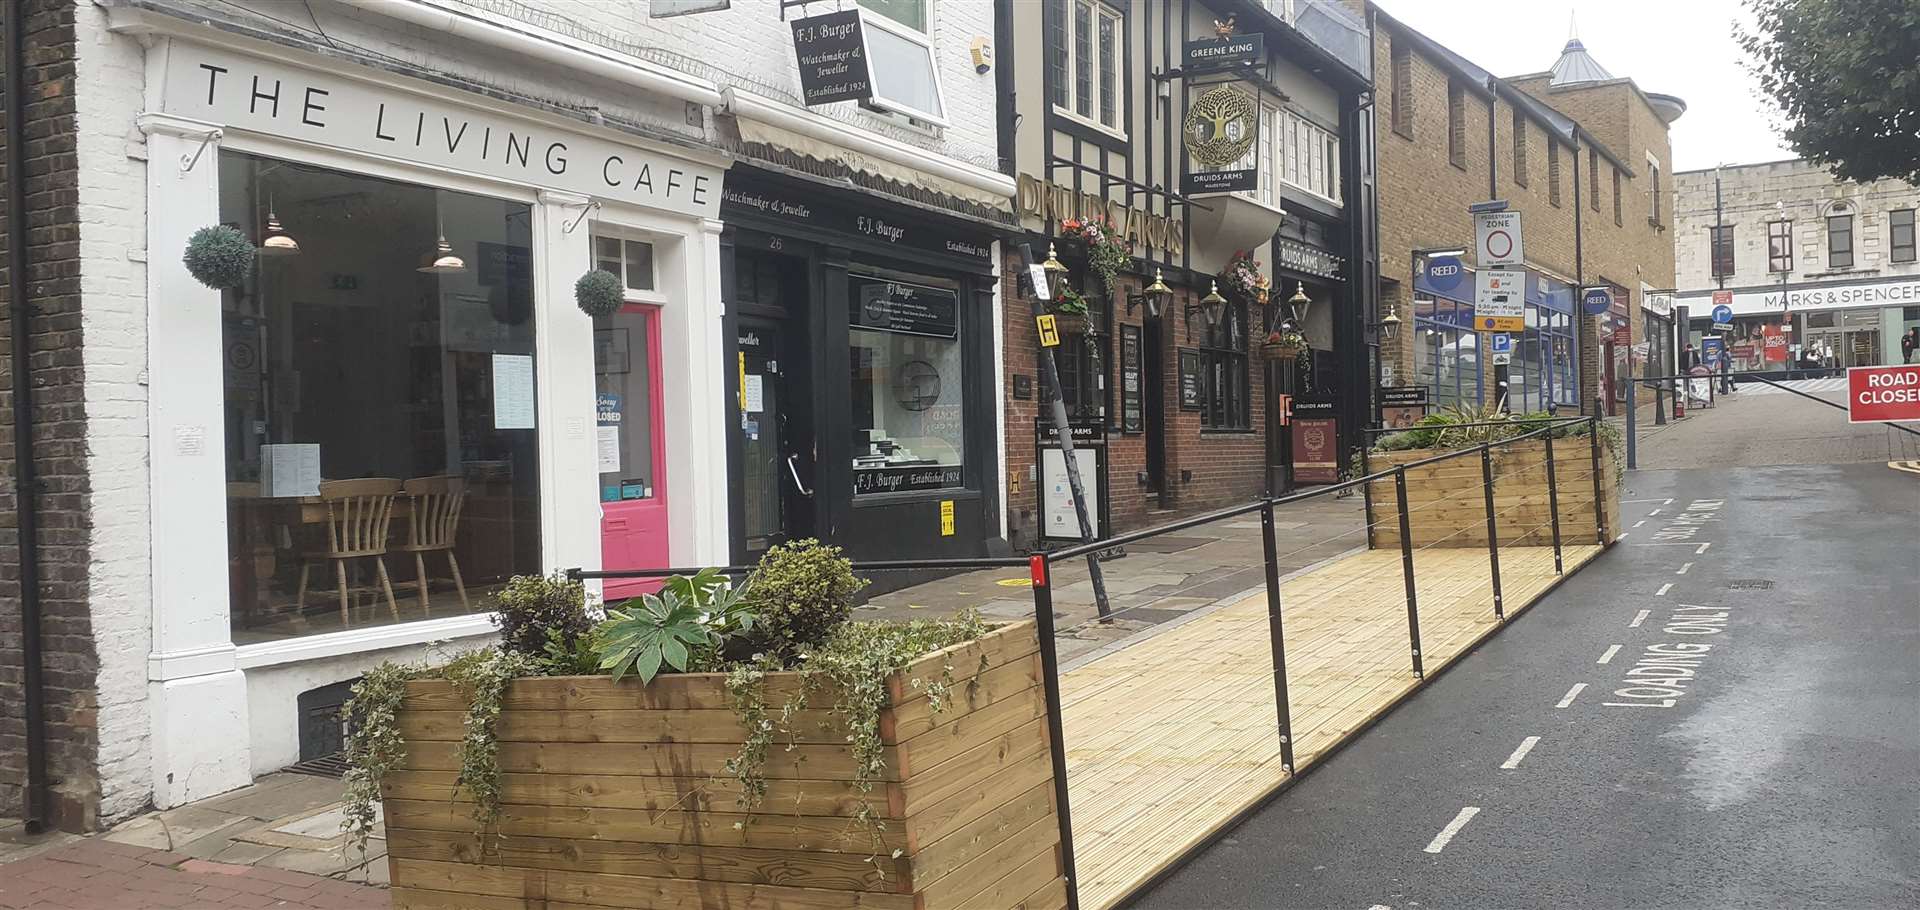 The new 'Parklets' appeared on Monday without warning